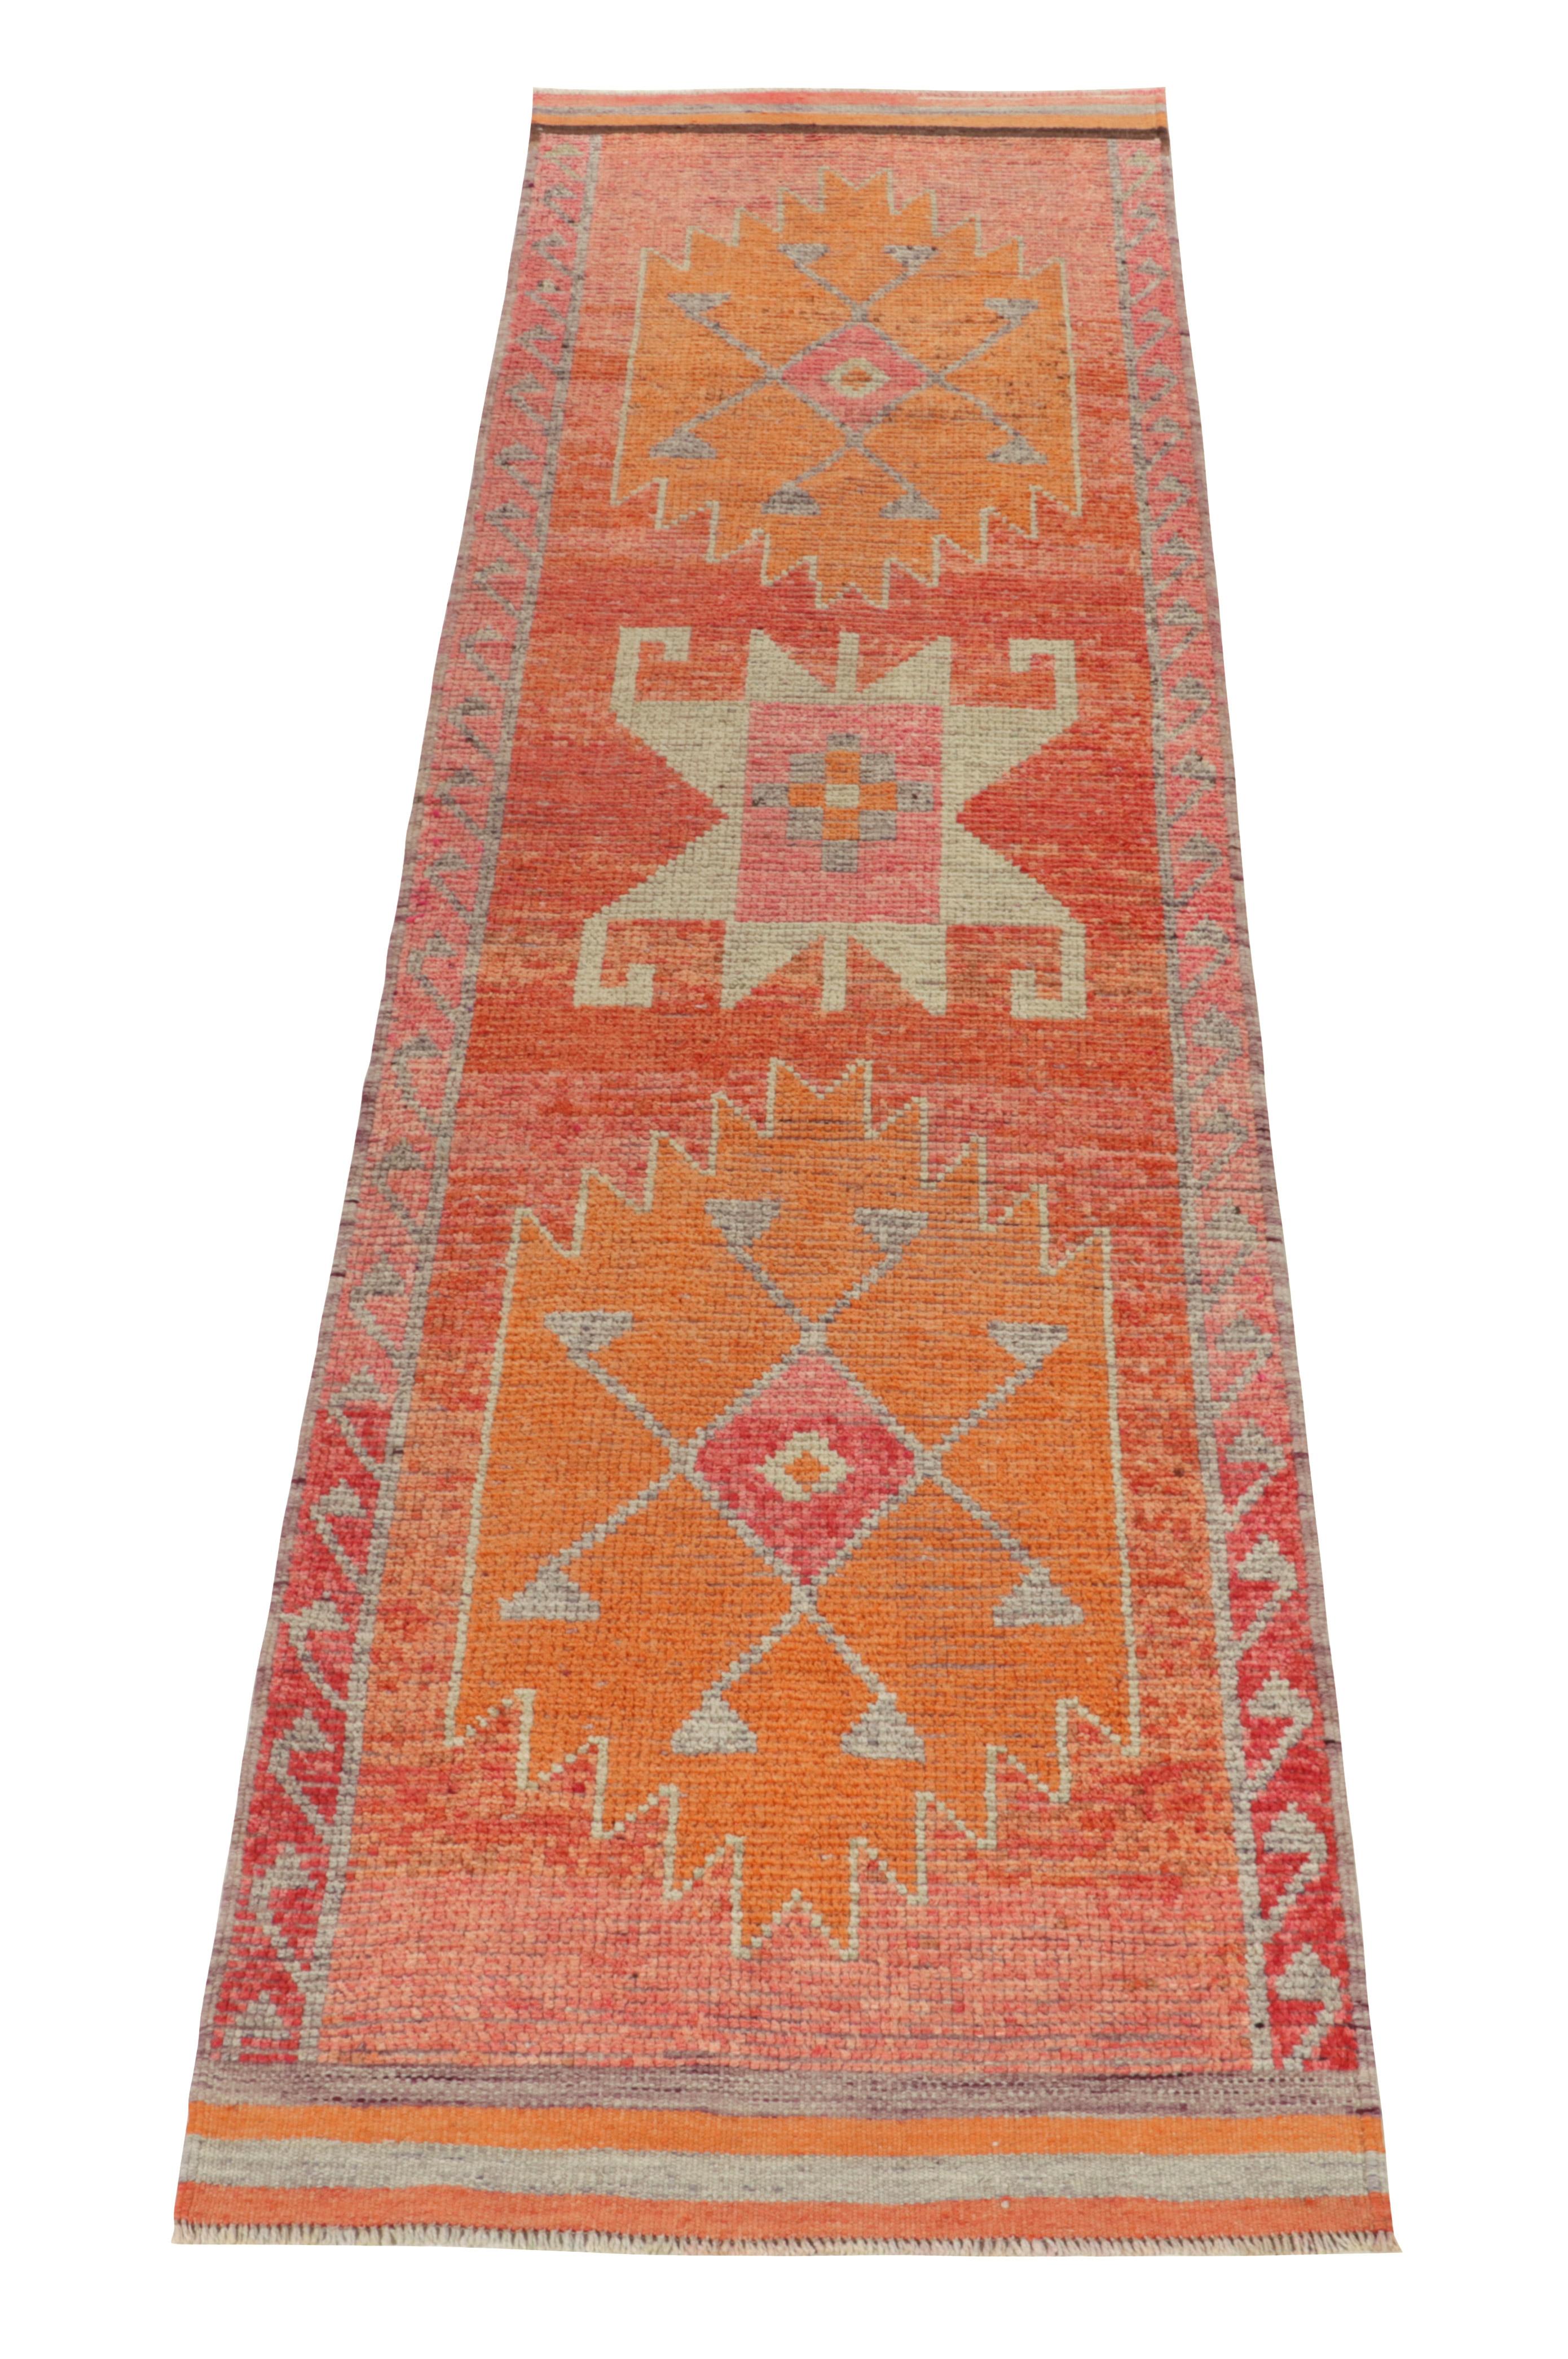 Hand-knotted in wool, a 3x11 runner from Rug & Kilim’s latest curation of rare, texturally superb tribal pieces. 

Originating from Turkey circa 1950-1960, this particular rug exemplifies the lively aspect of tribal aesthetics through playful tones